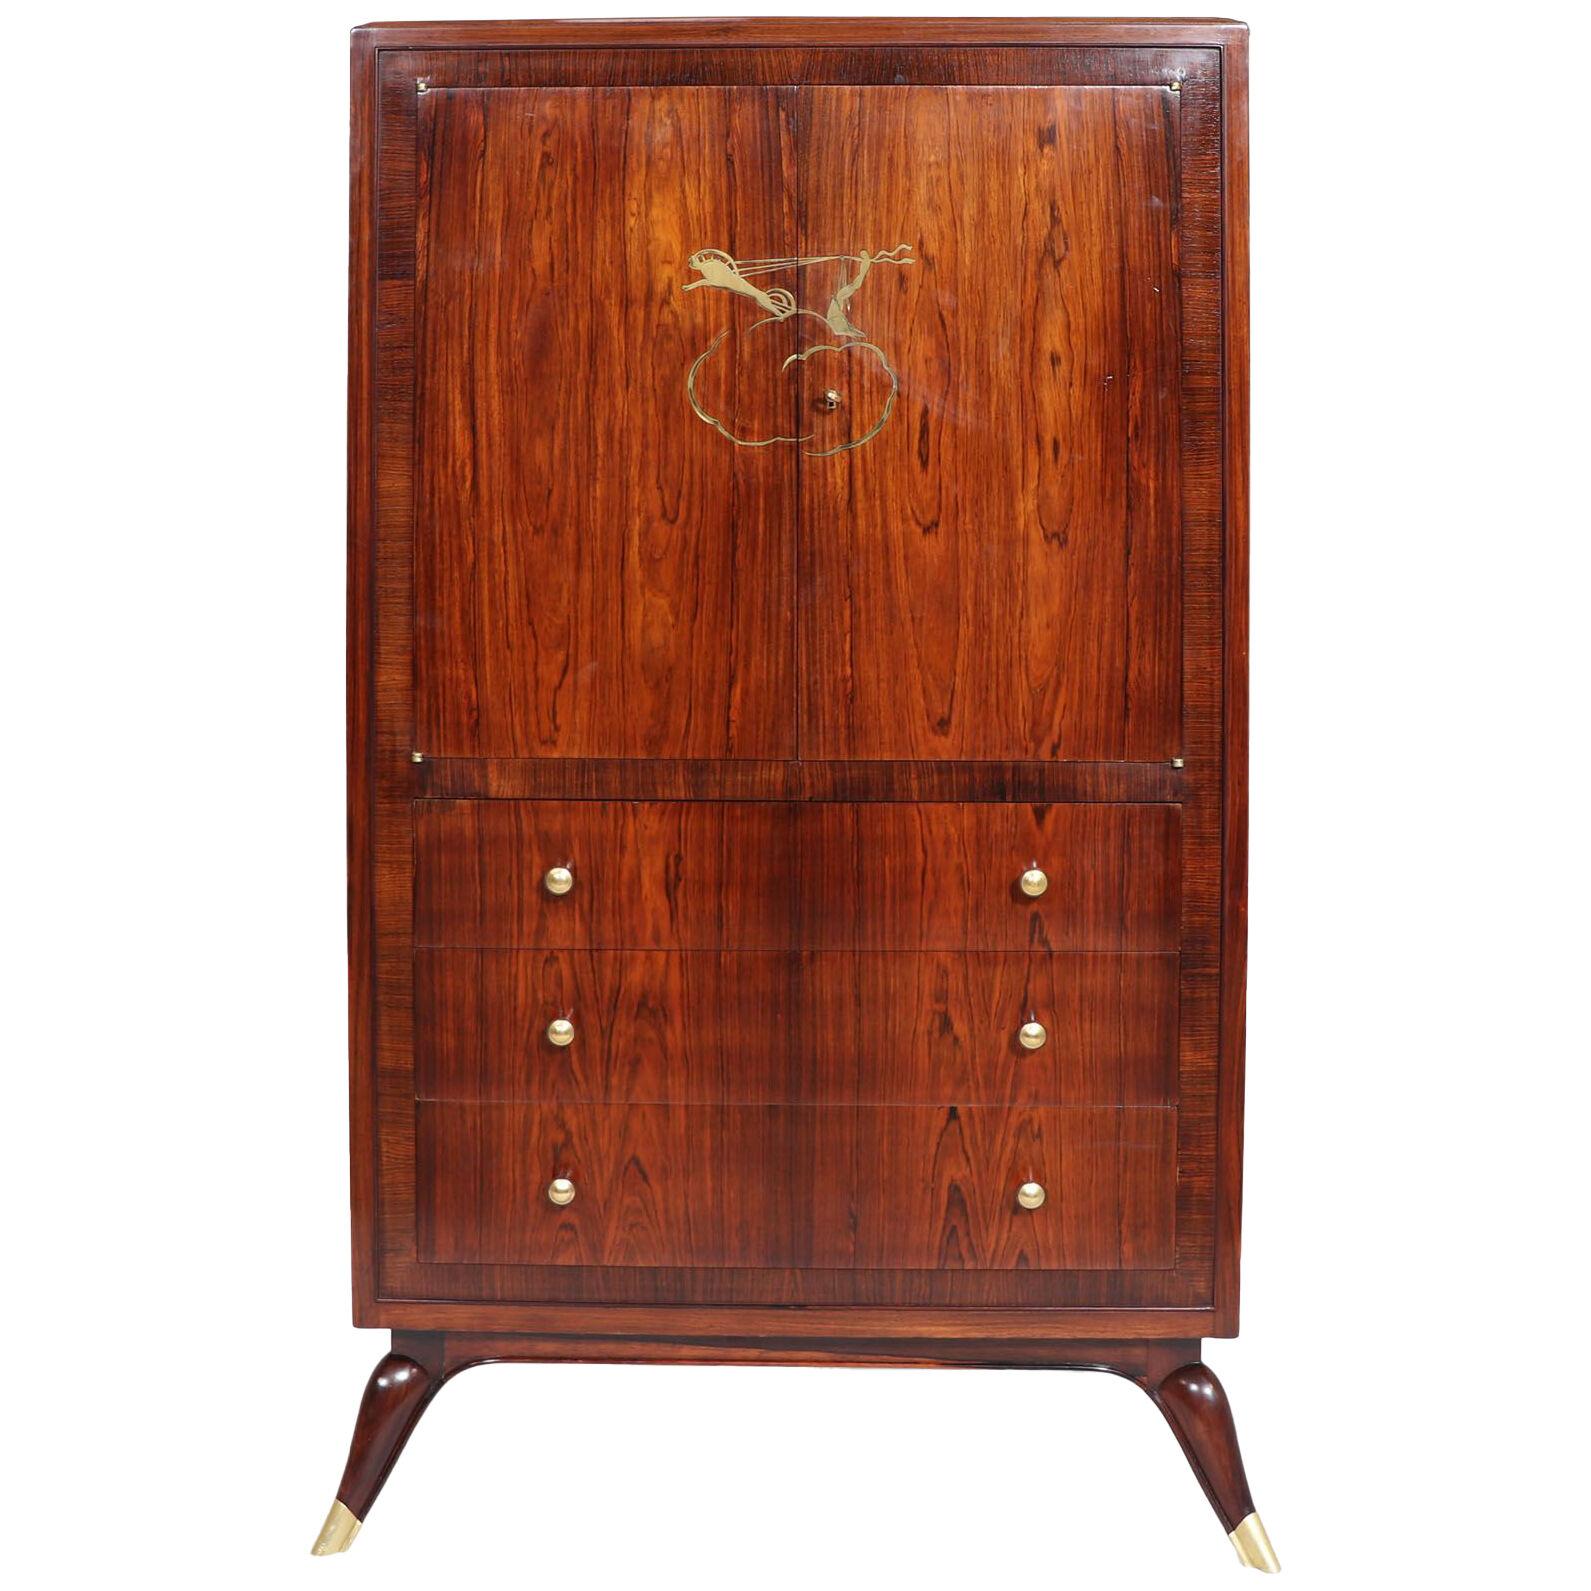 ART DECO ROSEWOOD CABINET IN THE MANNER OF RUHLMANN